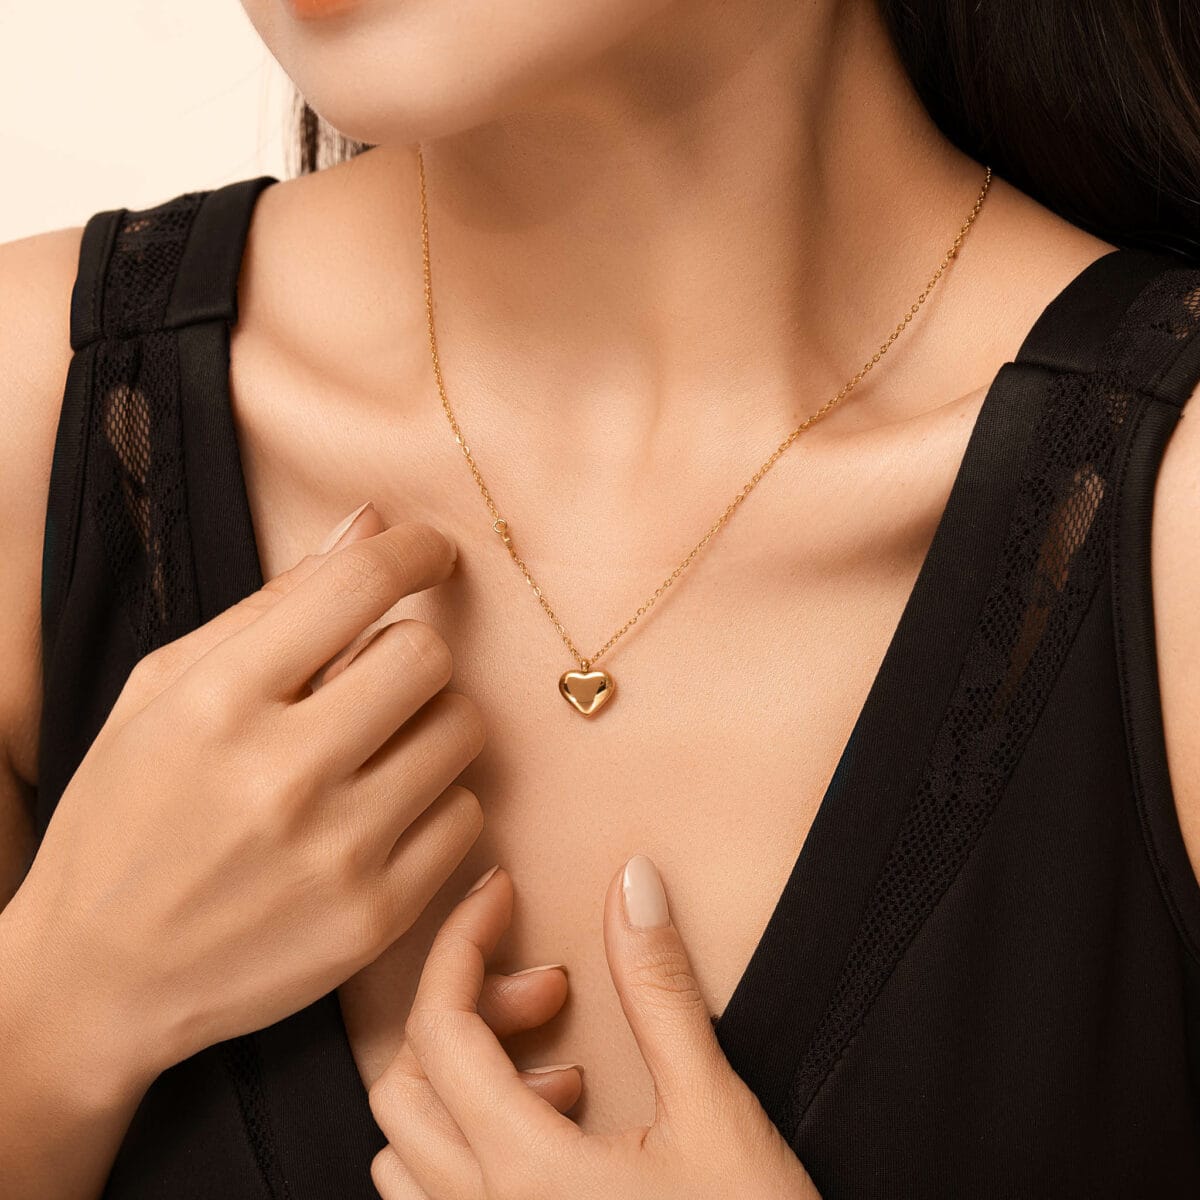 https://m.clubbella.co/product/bliss-duo-heart-necklace/ Bliss Duo Gold Necklace (3)